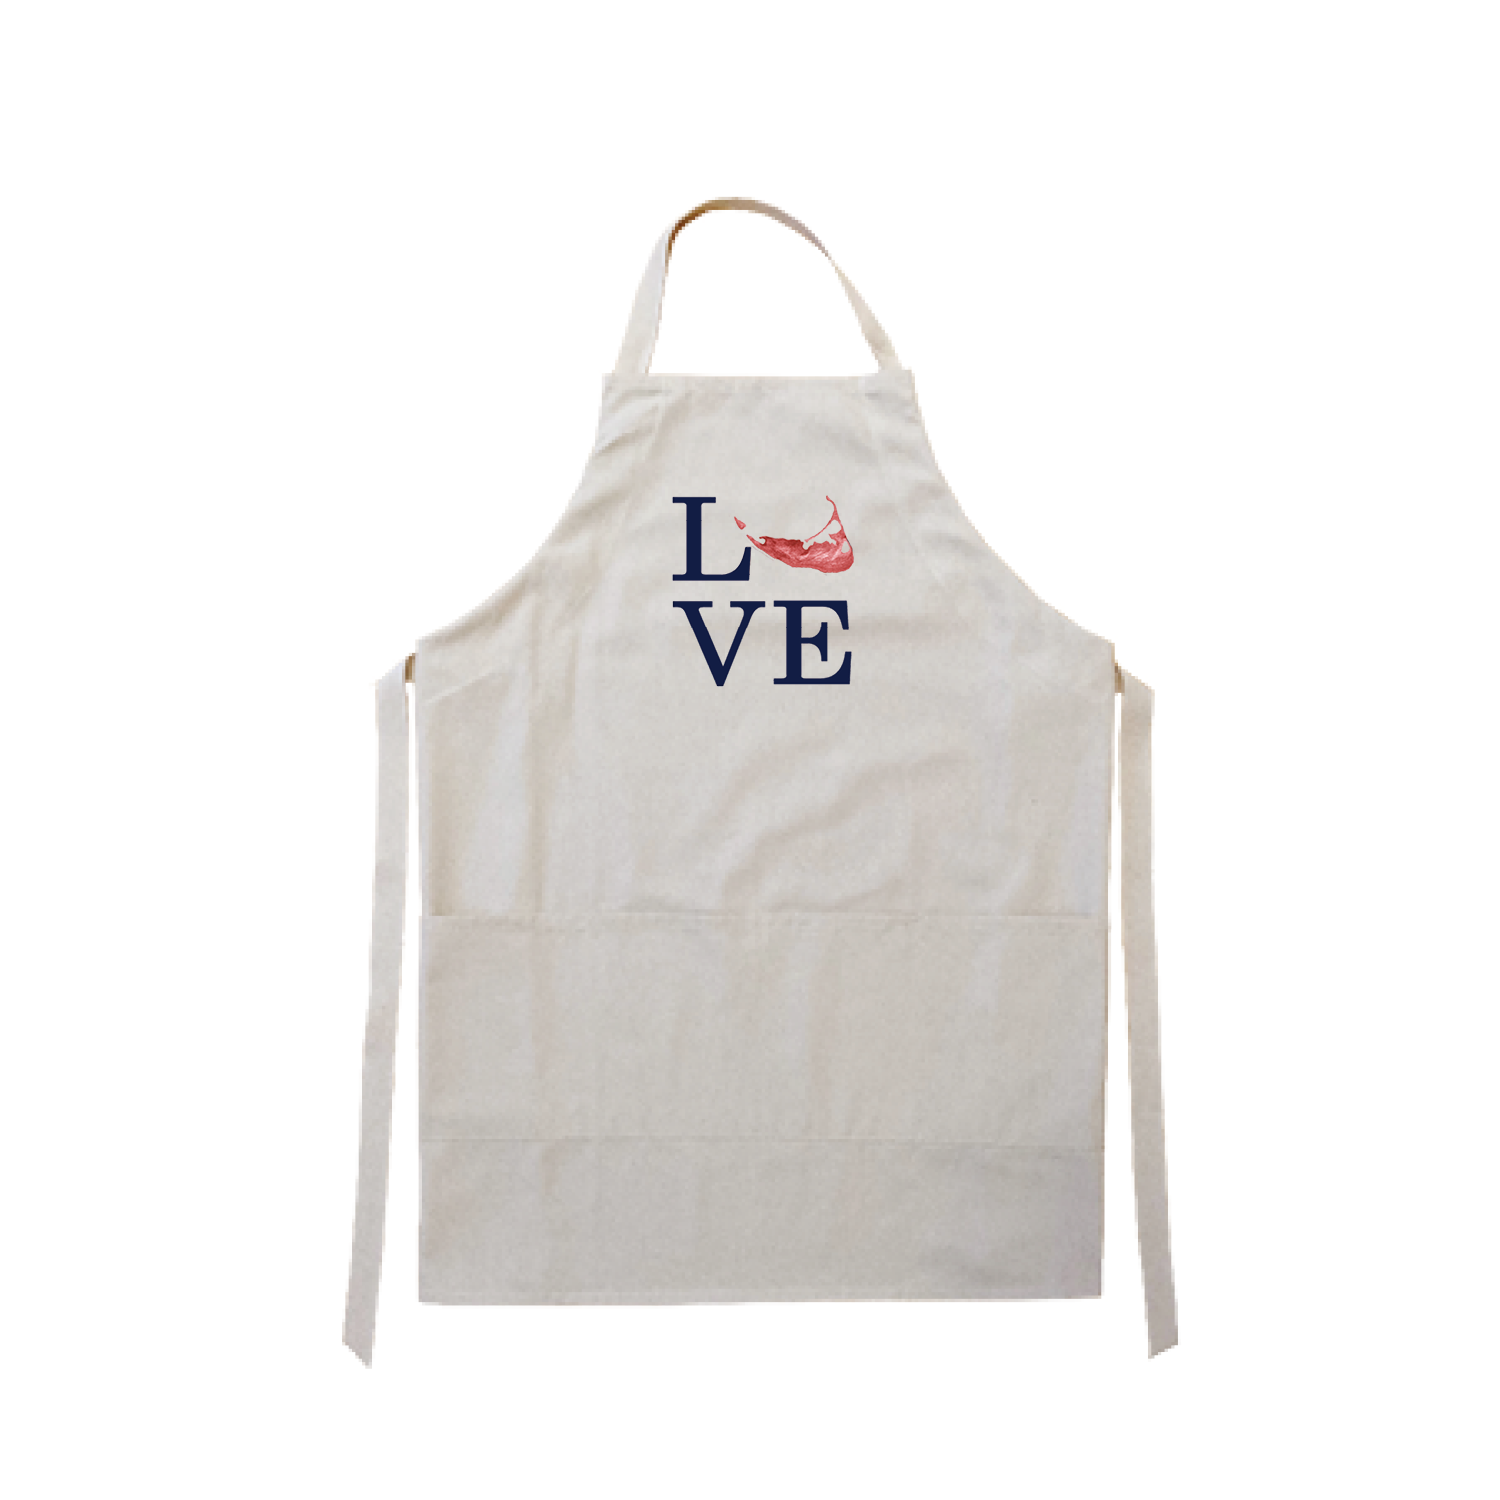 love nantucket island navy text with red island apron